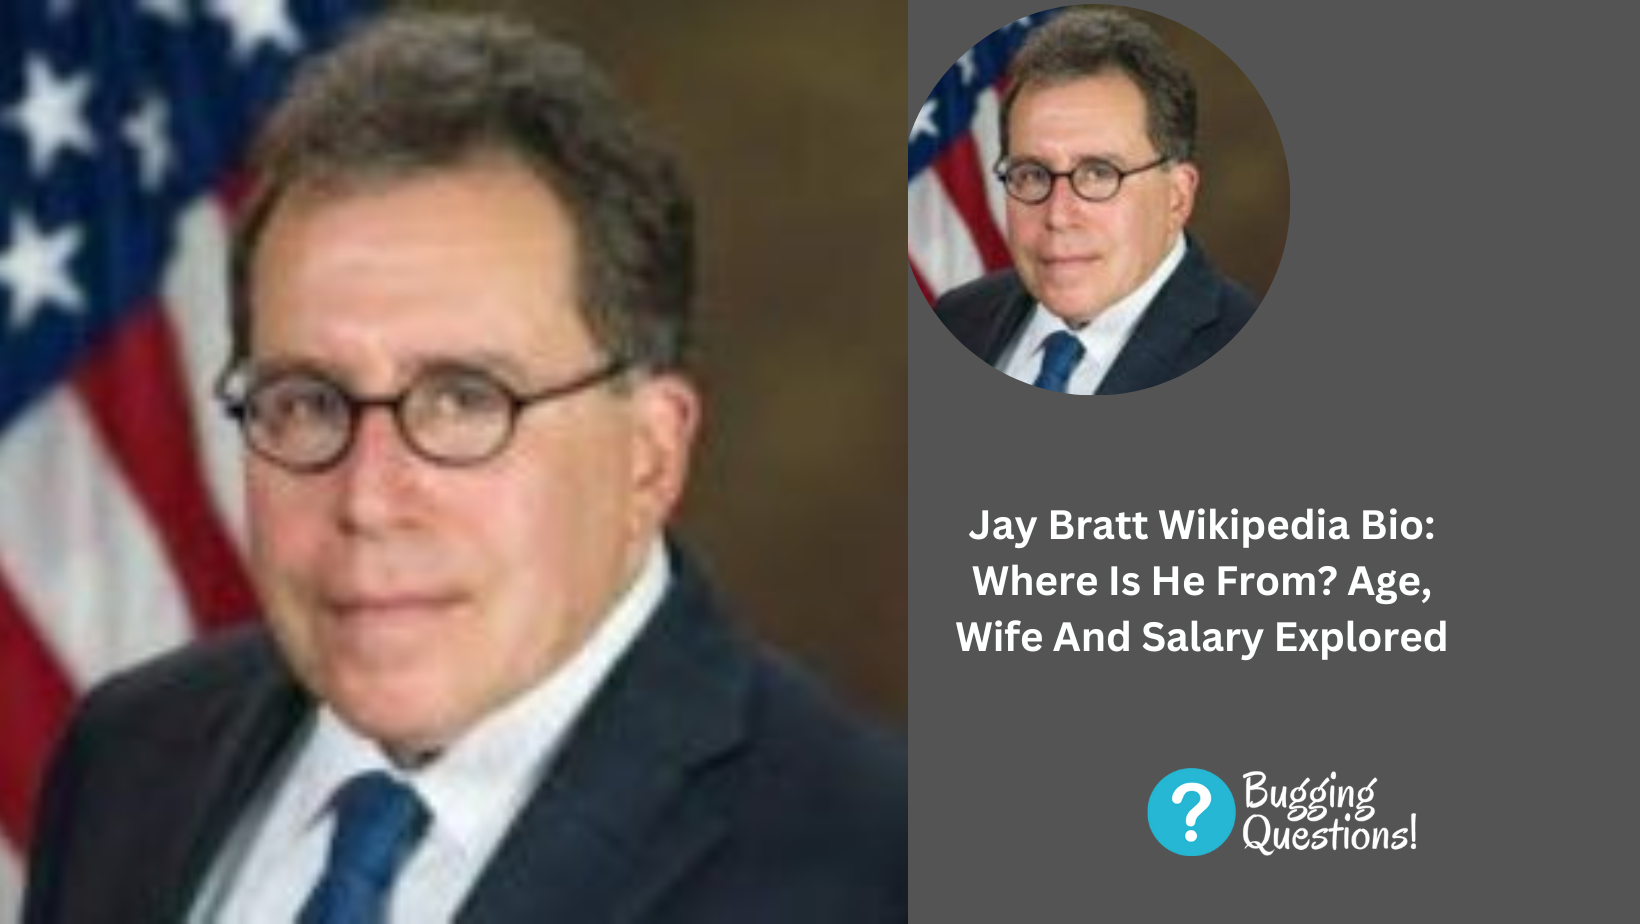 Jay Bratt Wikipedia Bio: Where Is He From? Age, Wife And Salary Explored